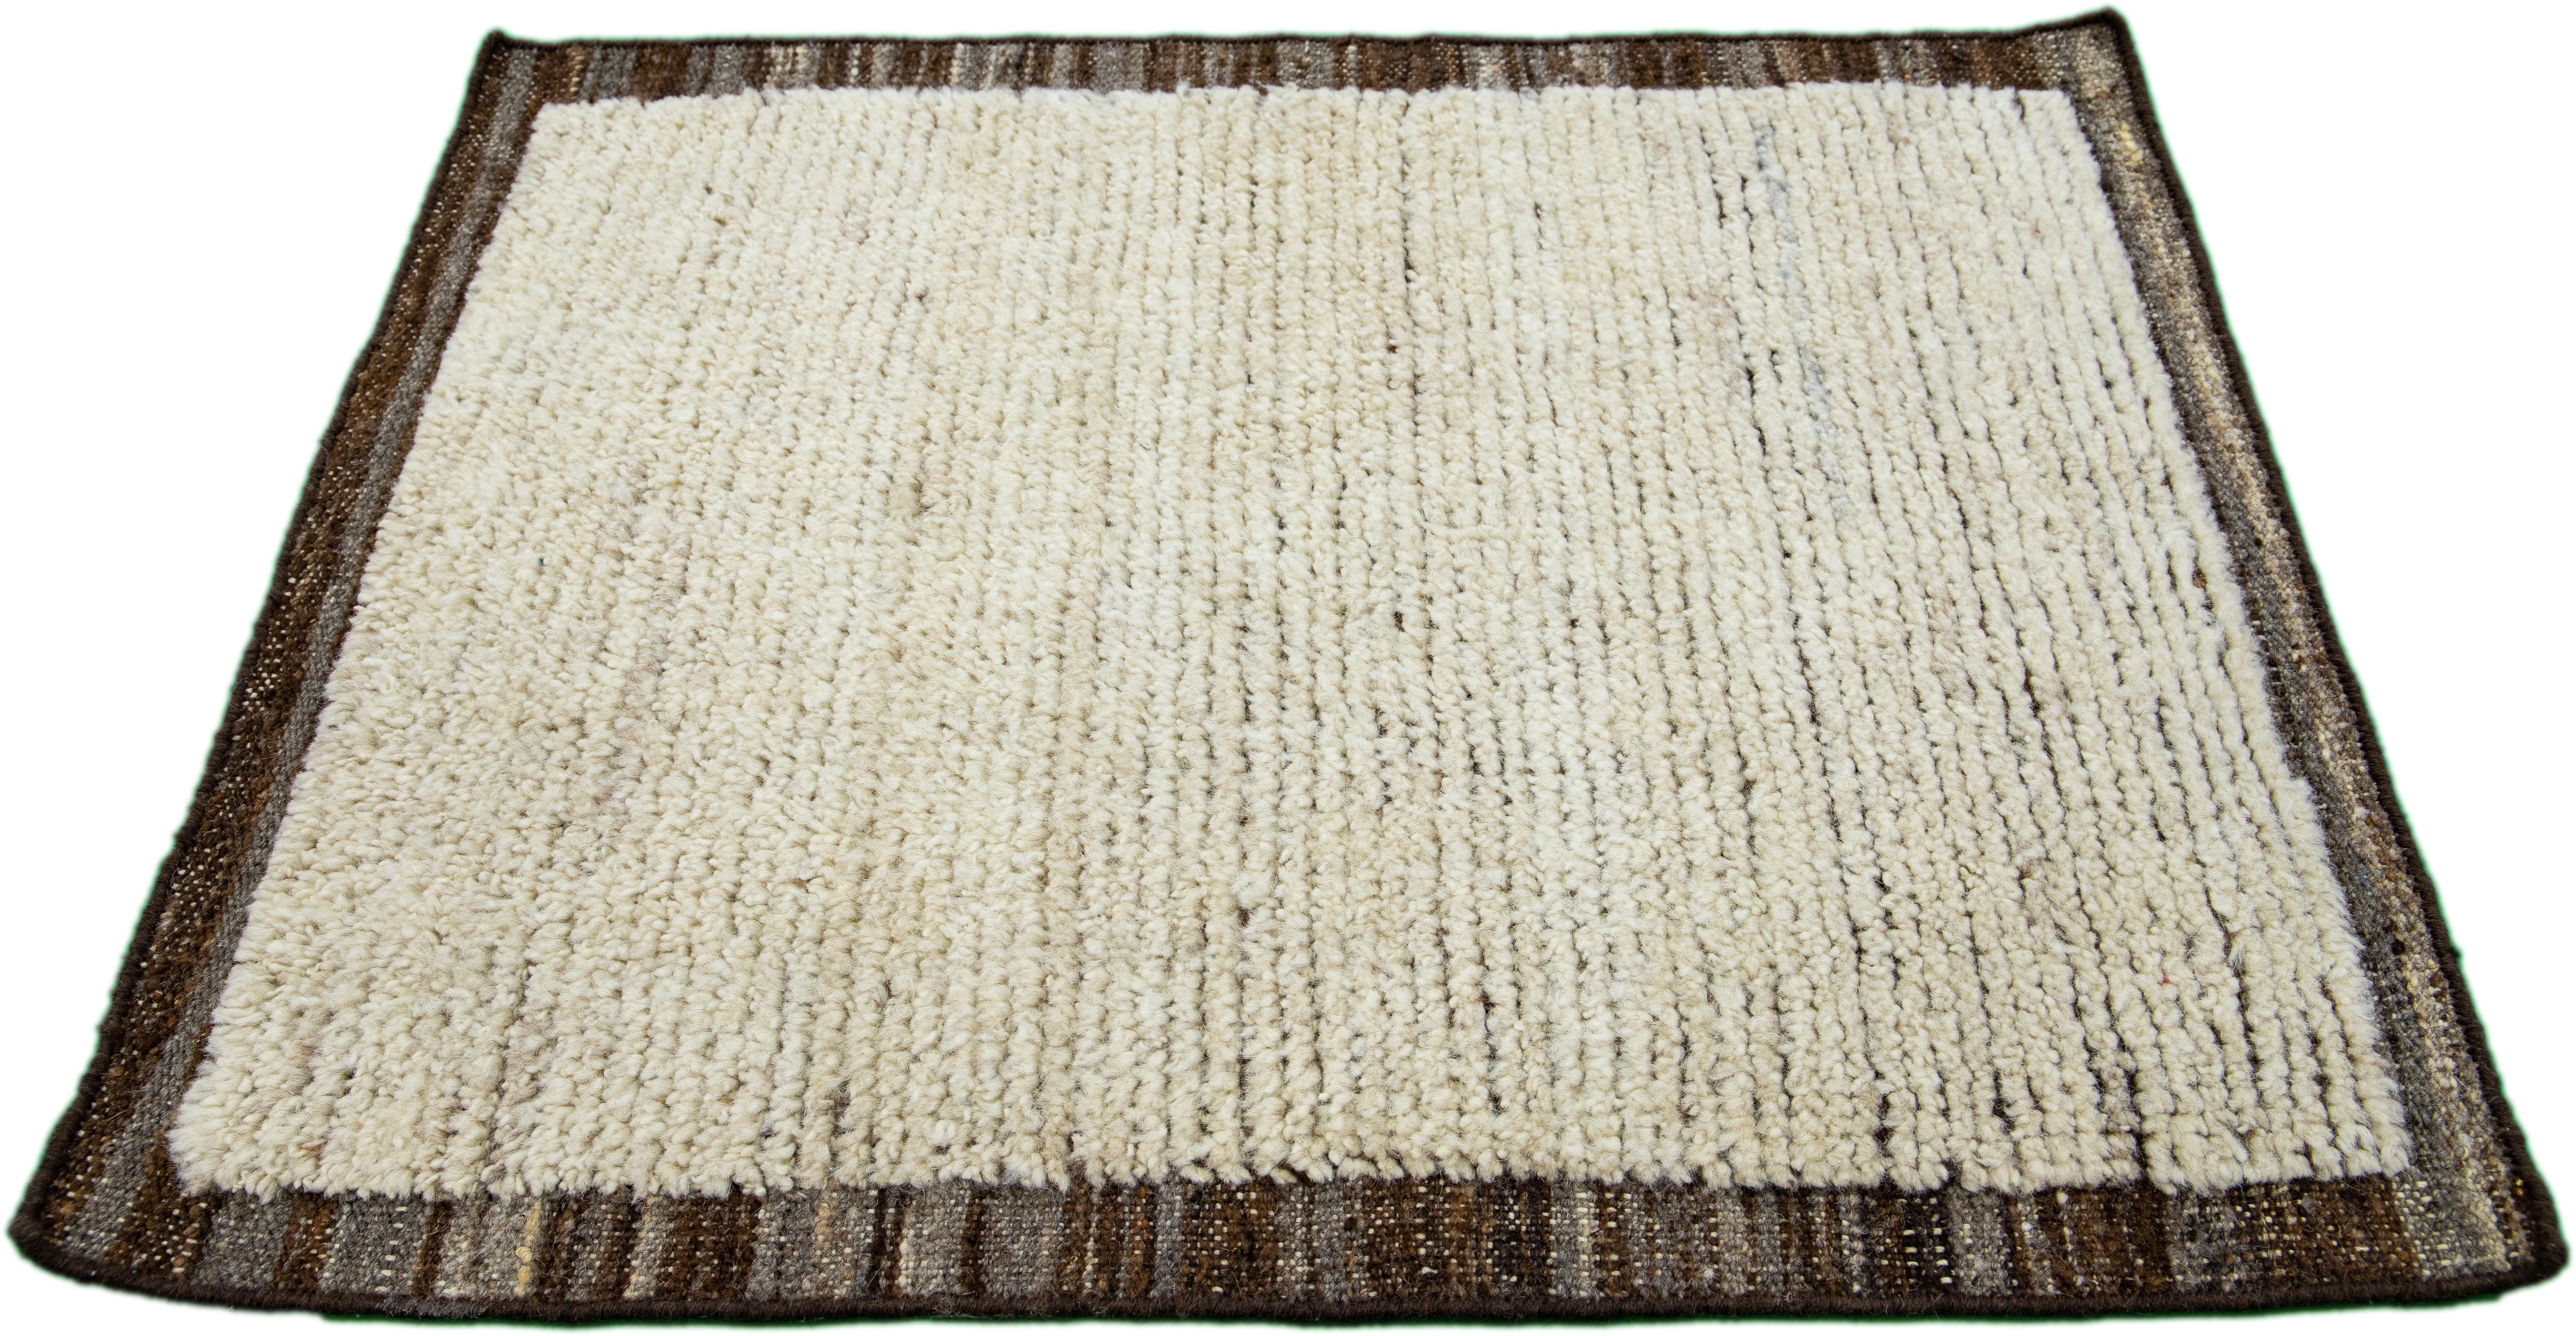 Apadana's Modern Moroccan Style custom wool rug. Custom sizes and colors made-to-order. 

Material: 100% Wool 
Techniques: Hand-knotted
Style: Moroccan 
Lead time: Approx. 15-16 wks available 
Colors: As shown, other custom colors are